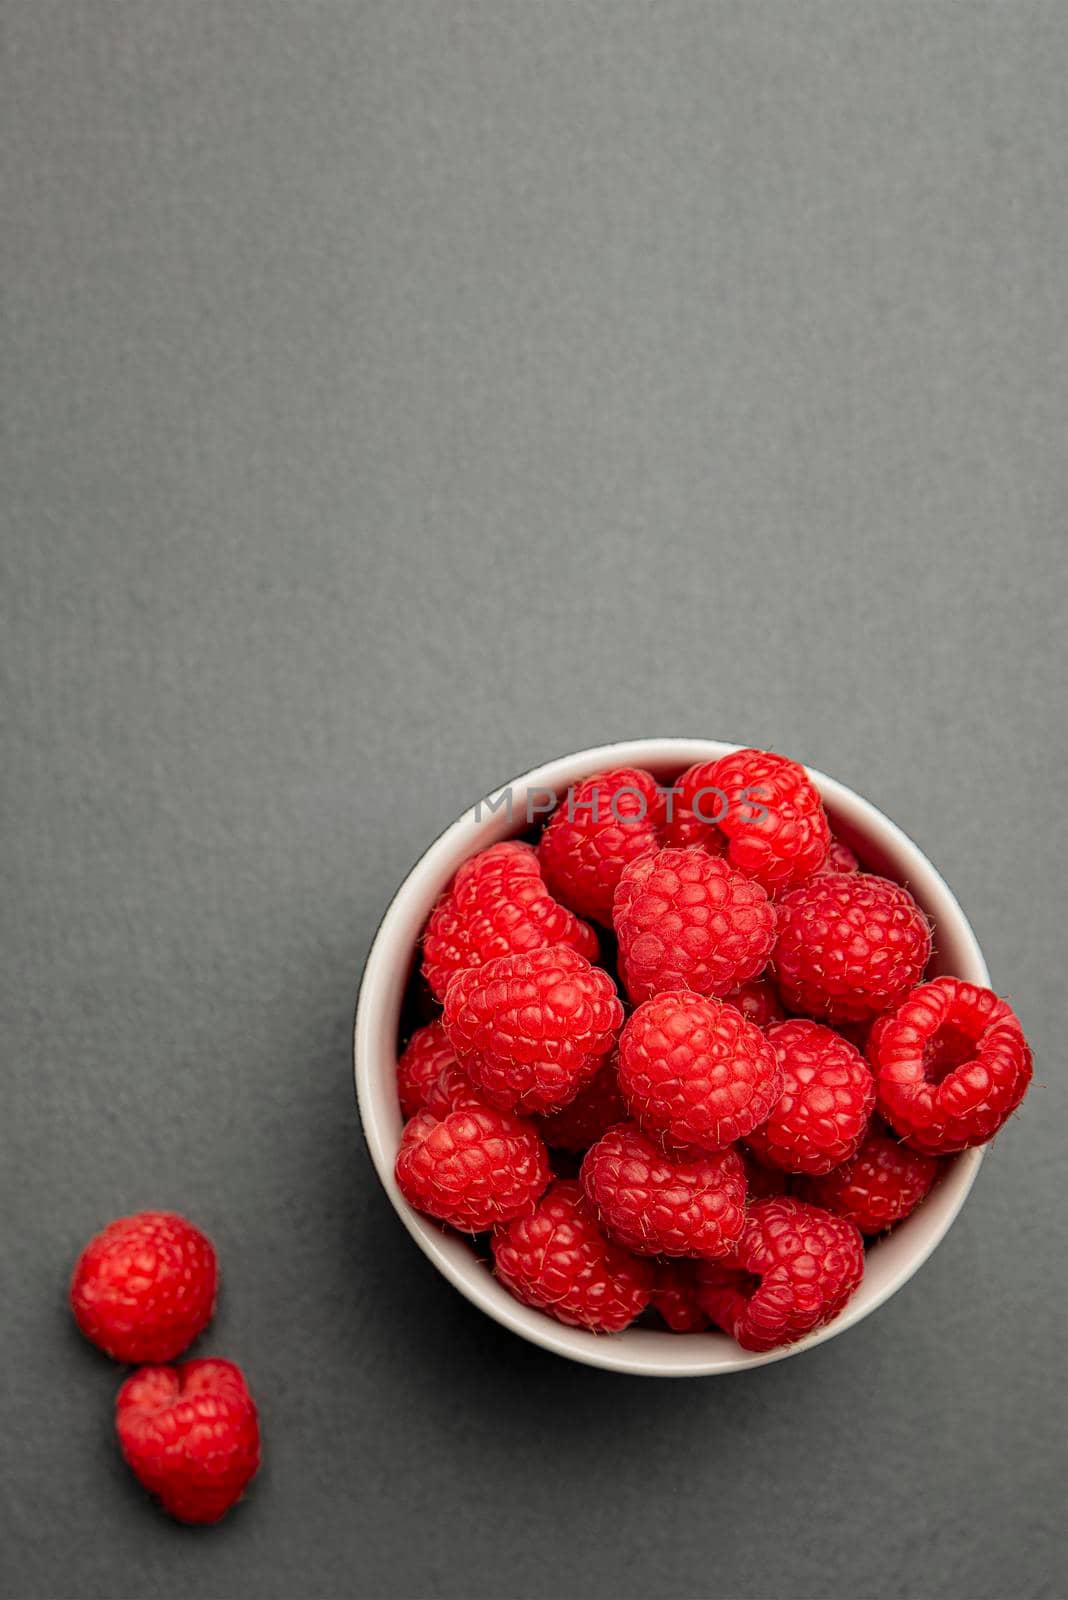 Fresh juicy raspberries in a small black plate. Bright red crimson close-up. Summer berry picking time. Healthy organic fruits for kids. Vertical photo.